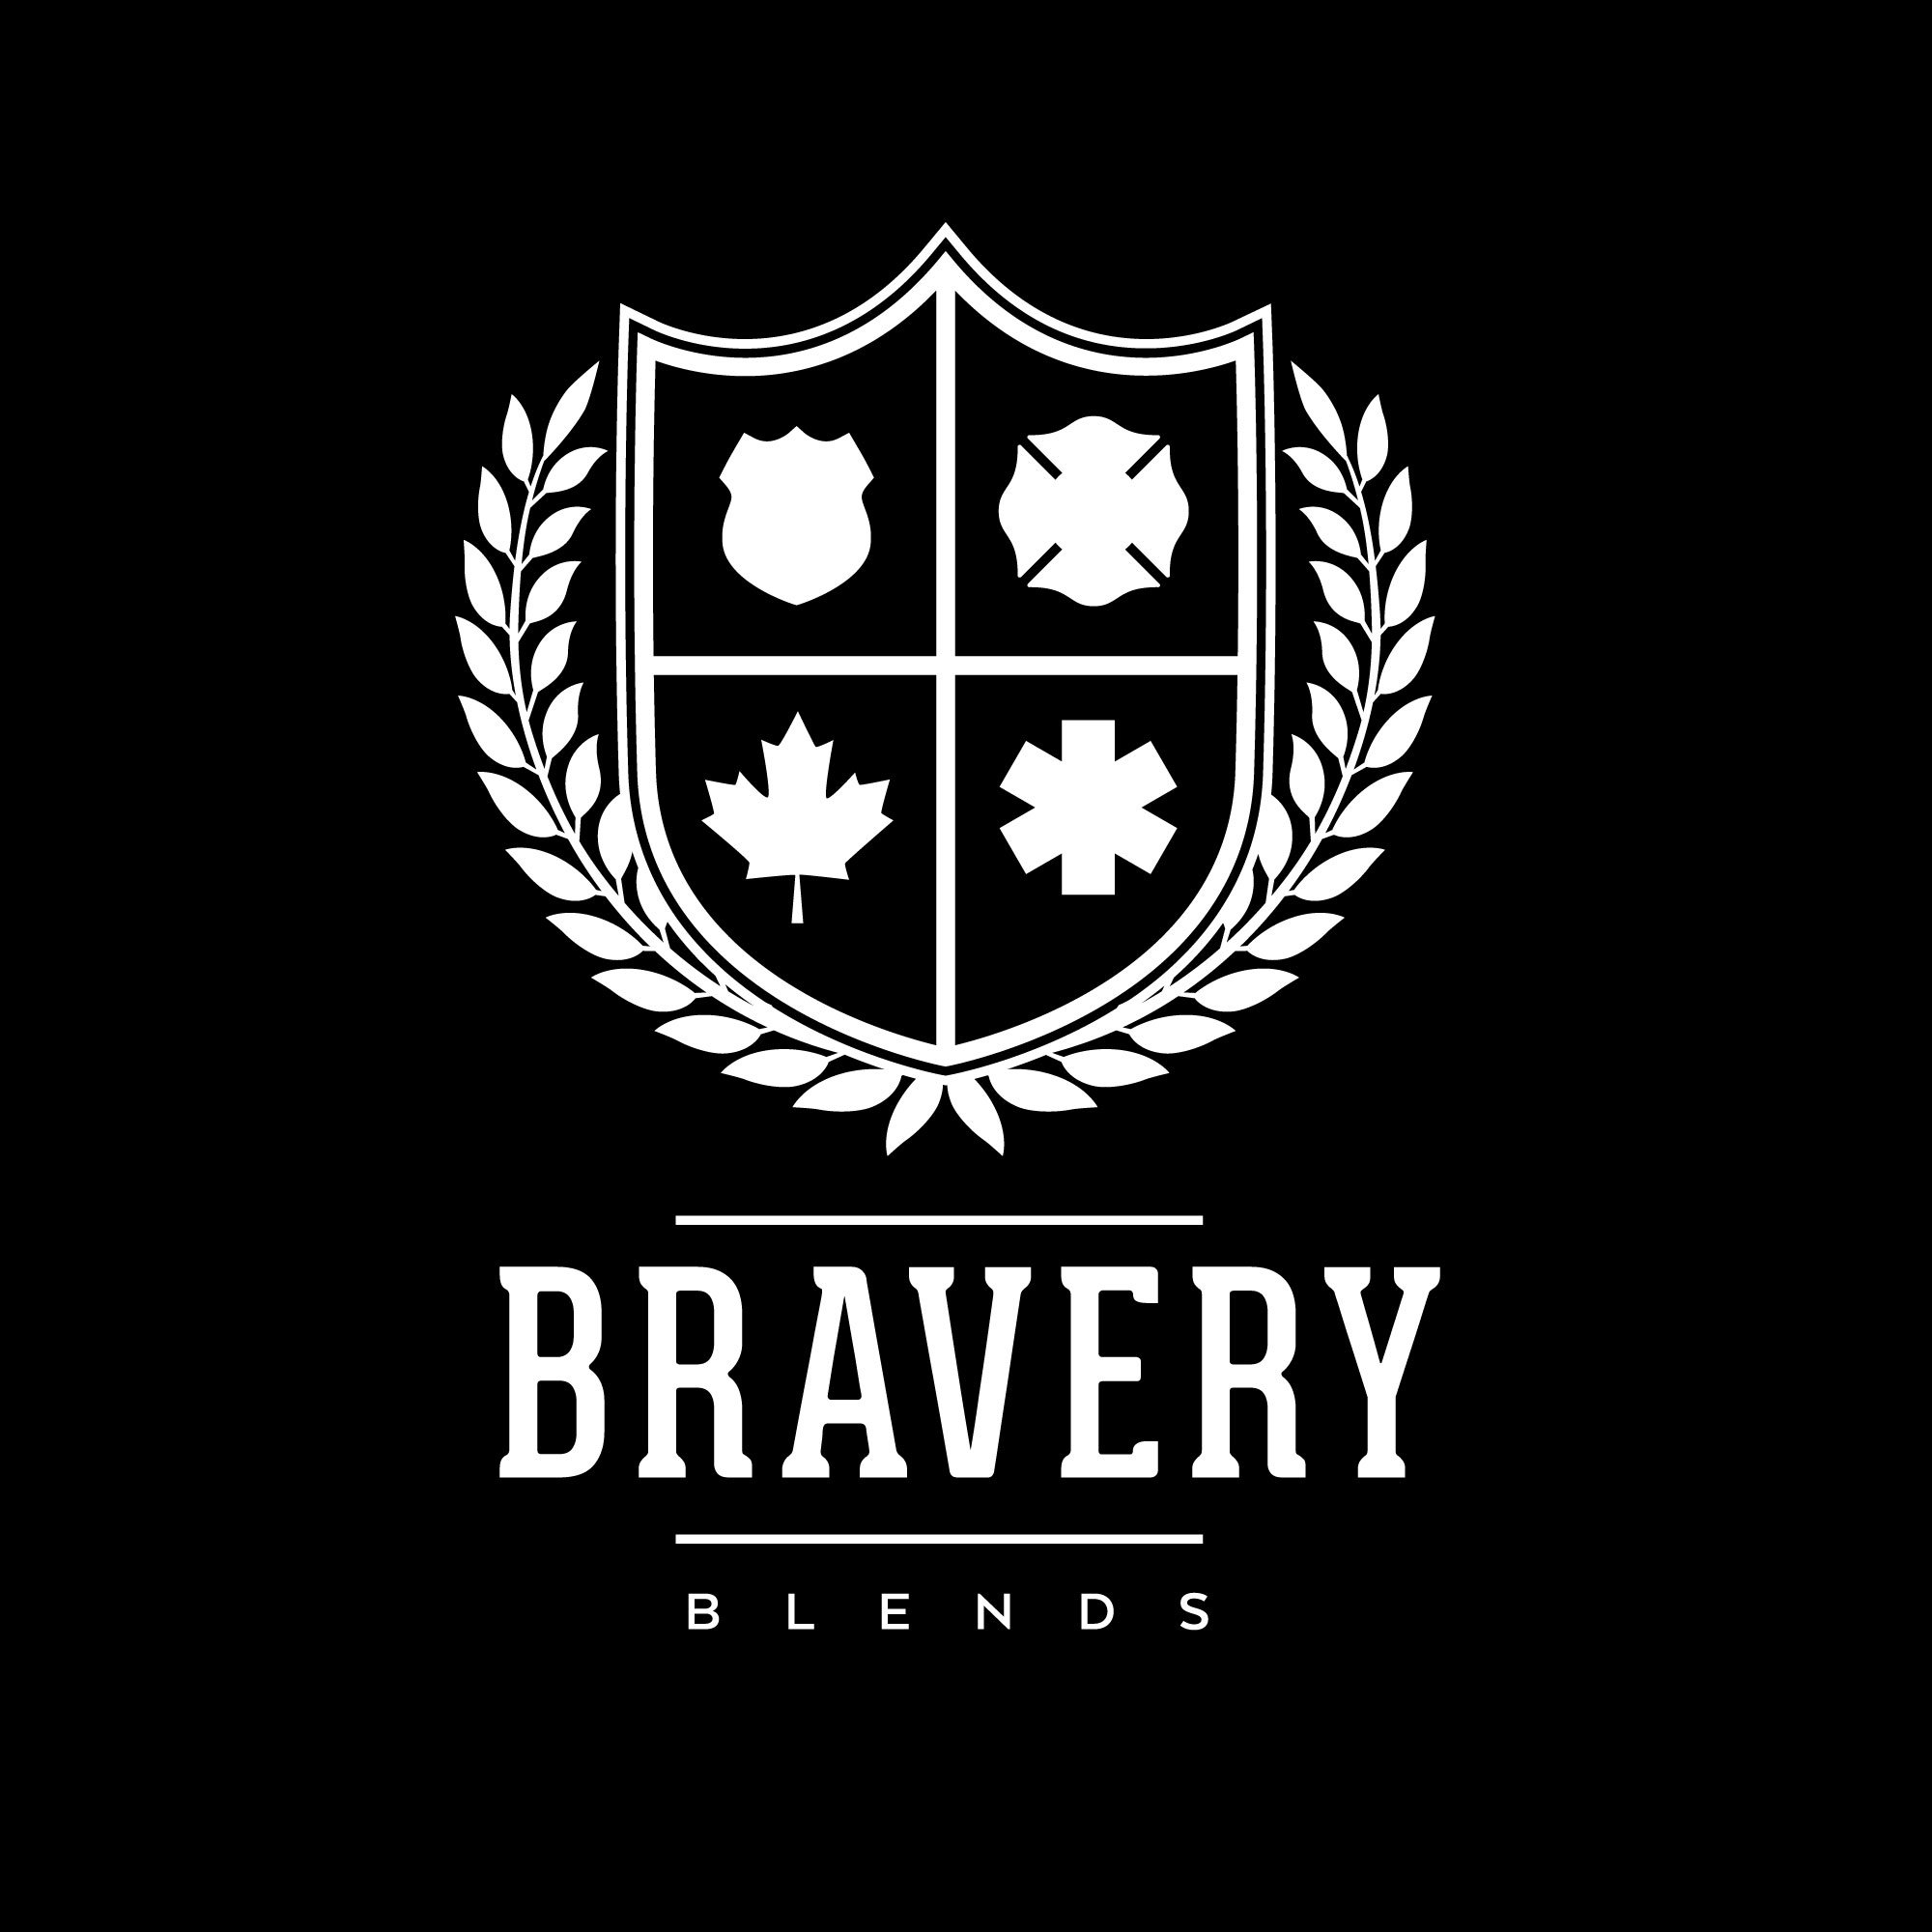 Bravery Blends roasts coffee for a cause! We donate a portion of our coffee sales to programs supporting our first responders and military members with PTSD.